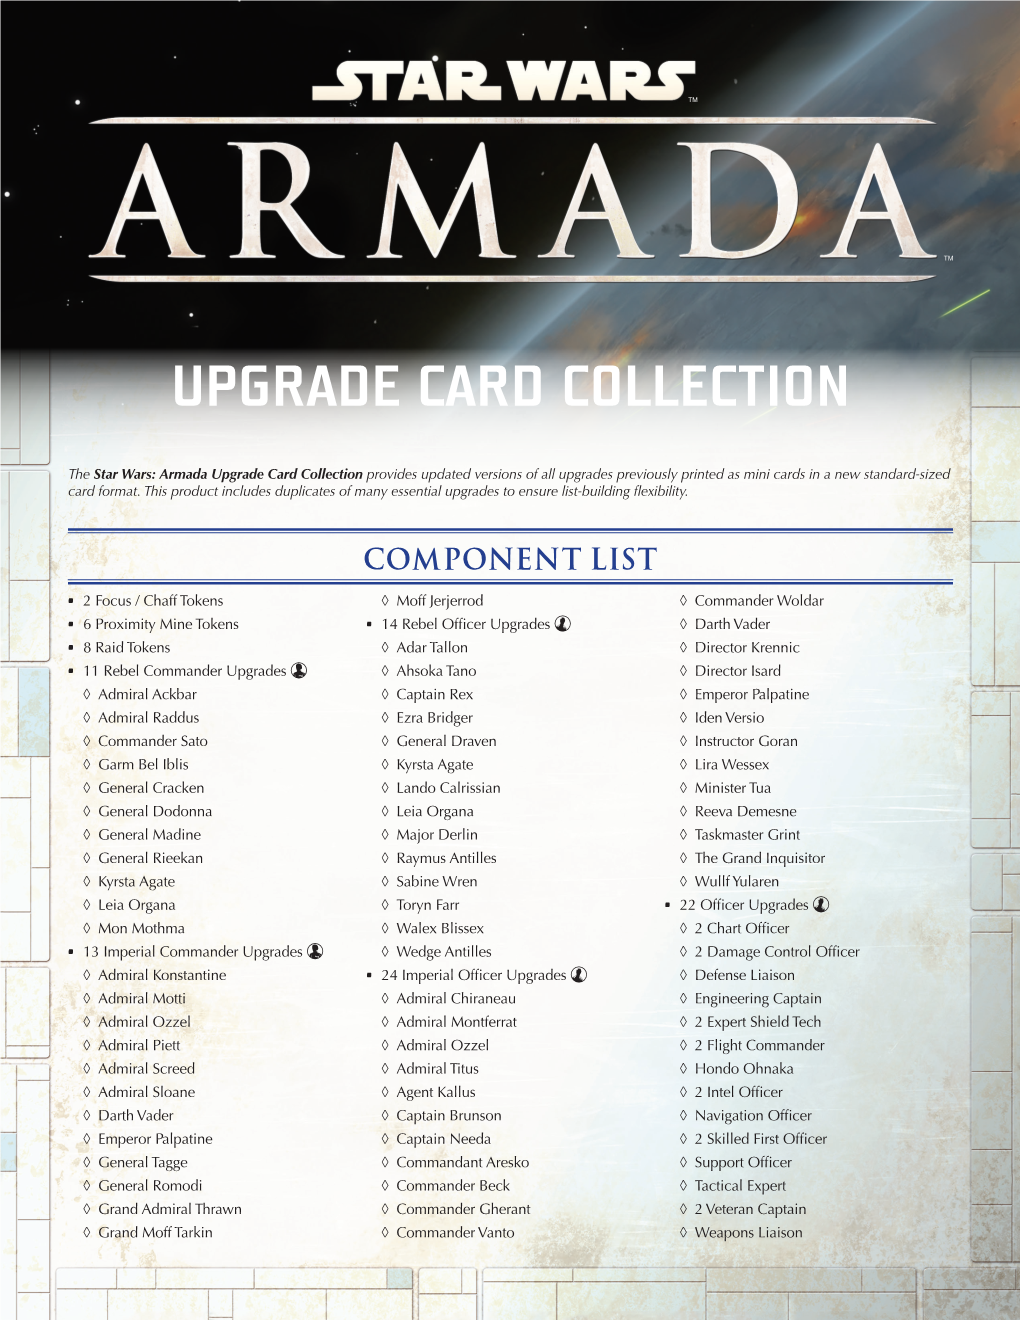 Upgrade Card Collection